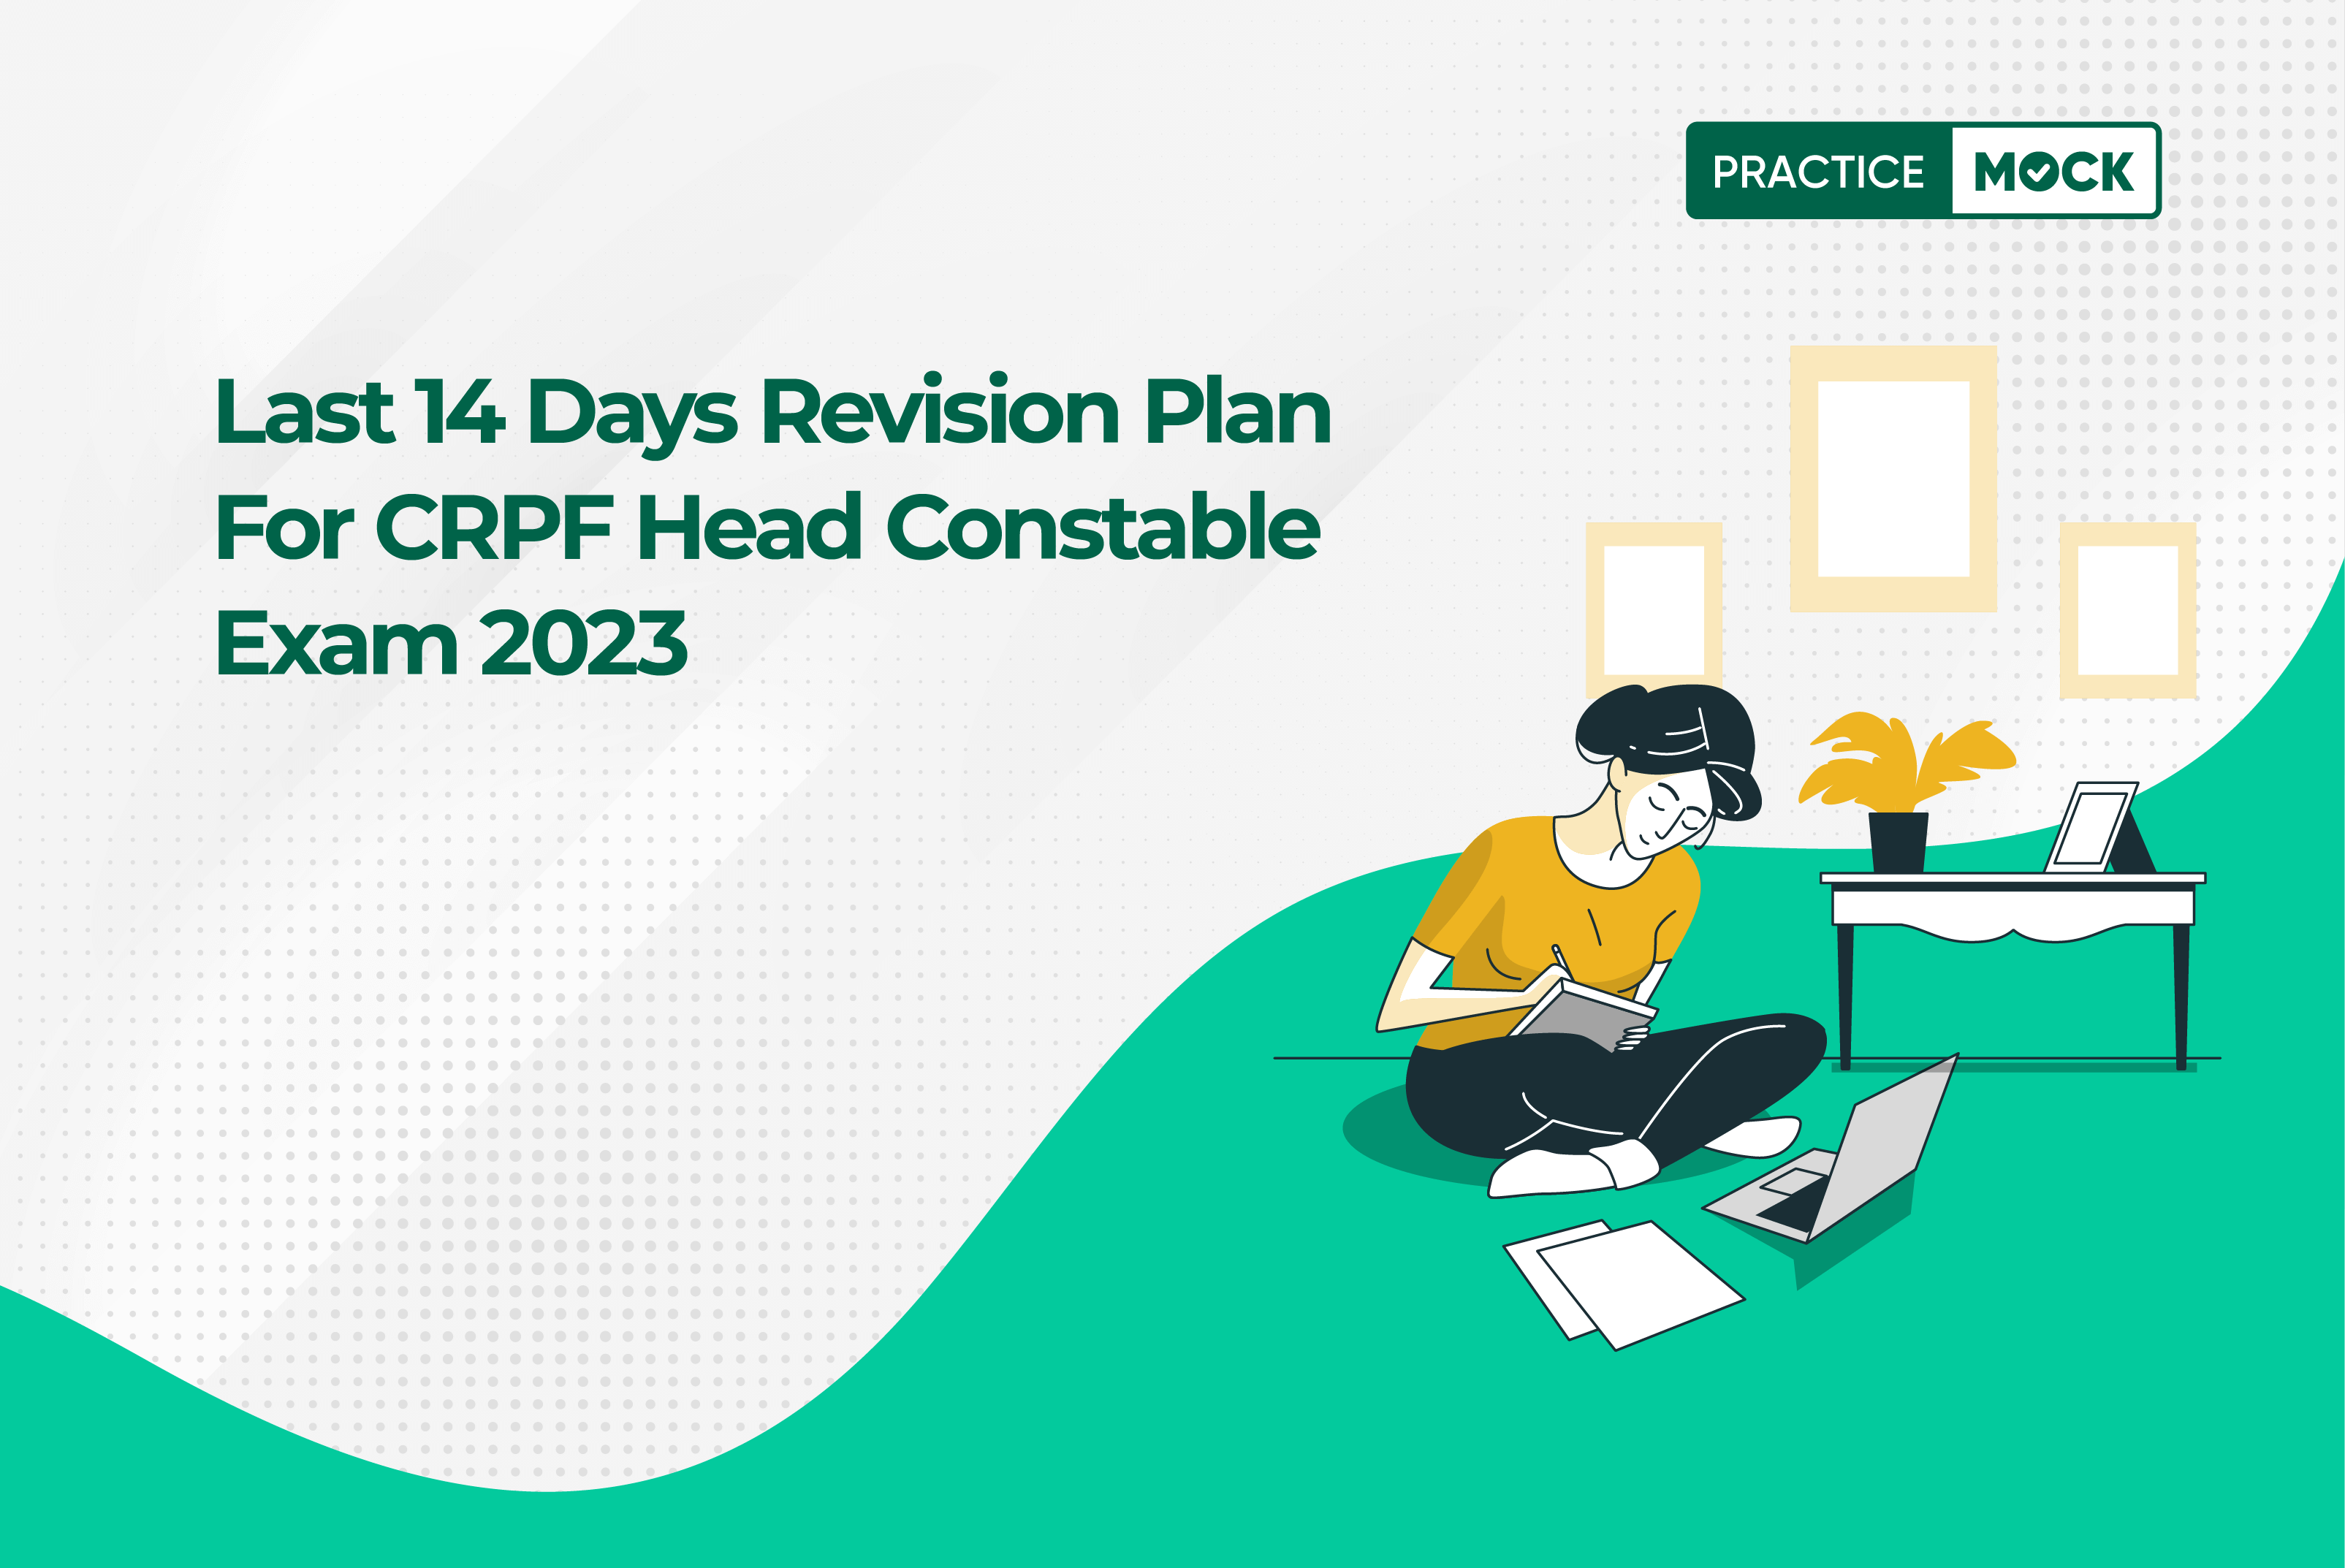 Last 14 Days Revision Plan for CRPF Head Constable Exam 2023